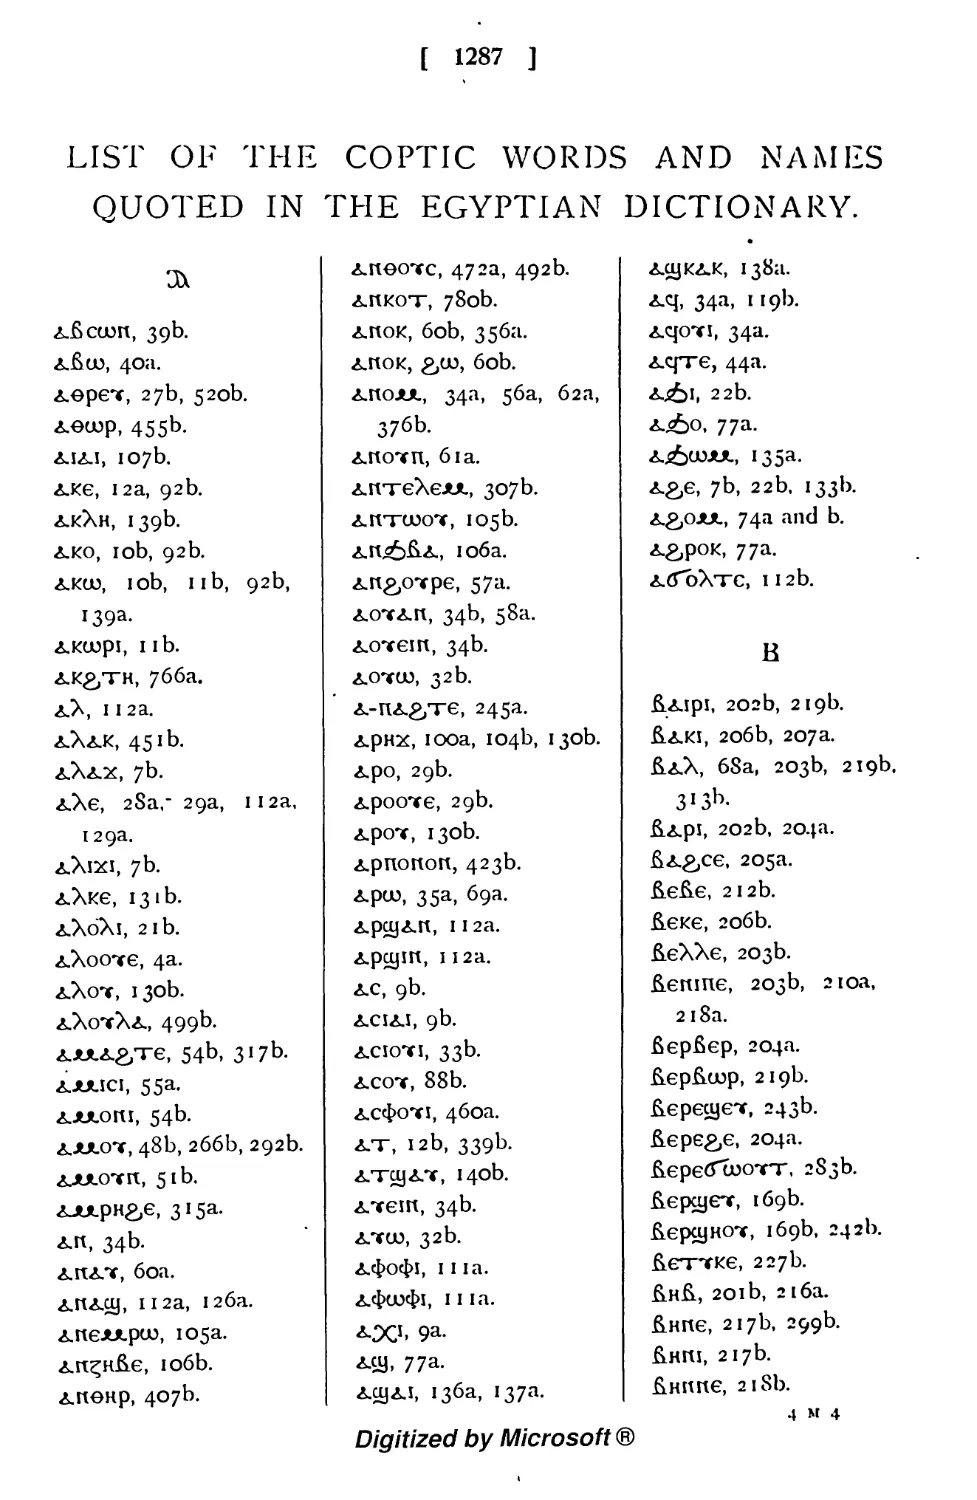 List of Coptic Words quoted in the Dictionary